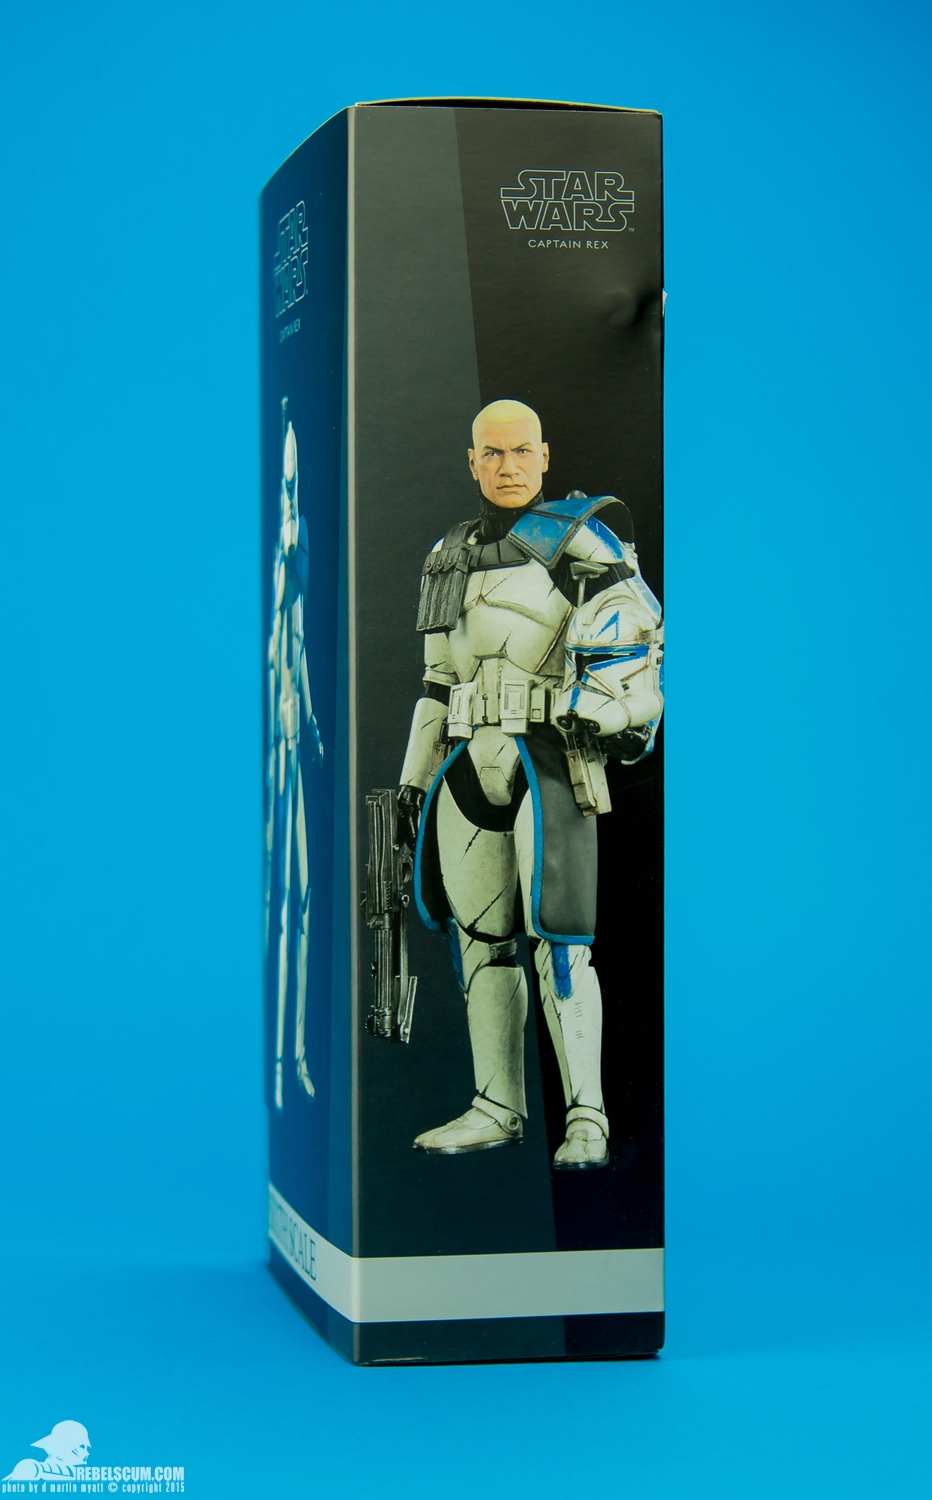 Captain-Rex-Phase-II-Sixth-Scale-Figure-Sideshow-Collectibles-025.jpg